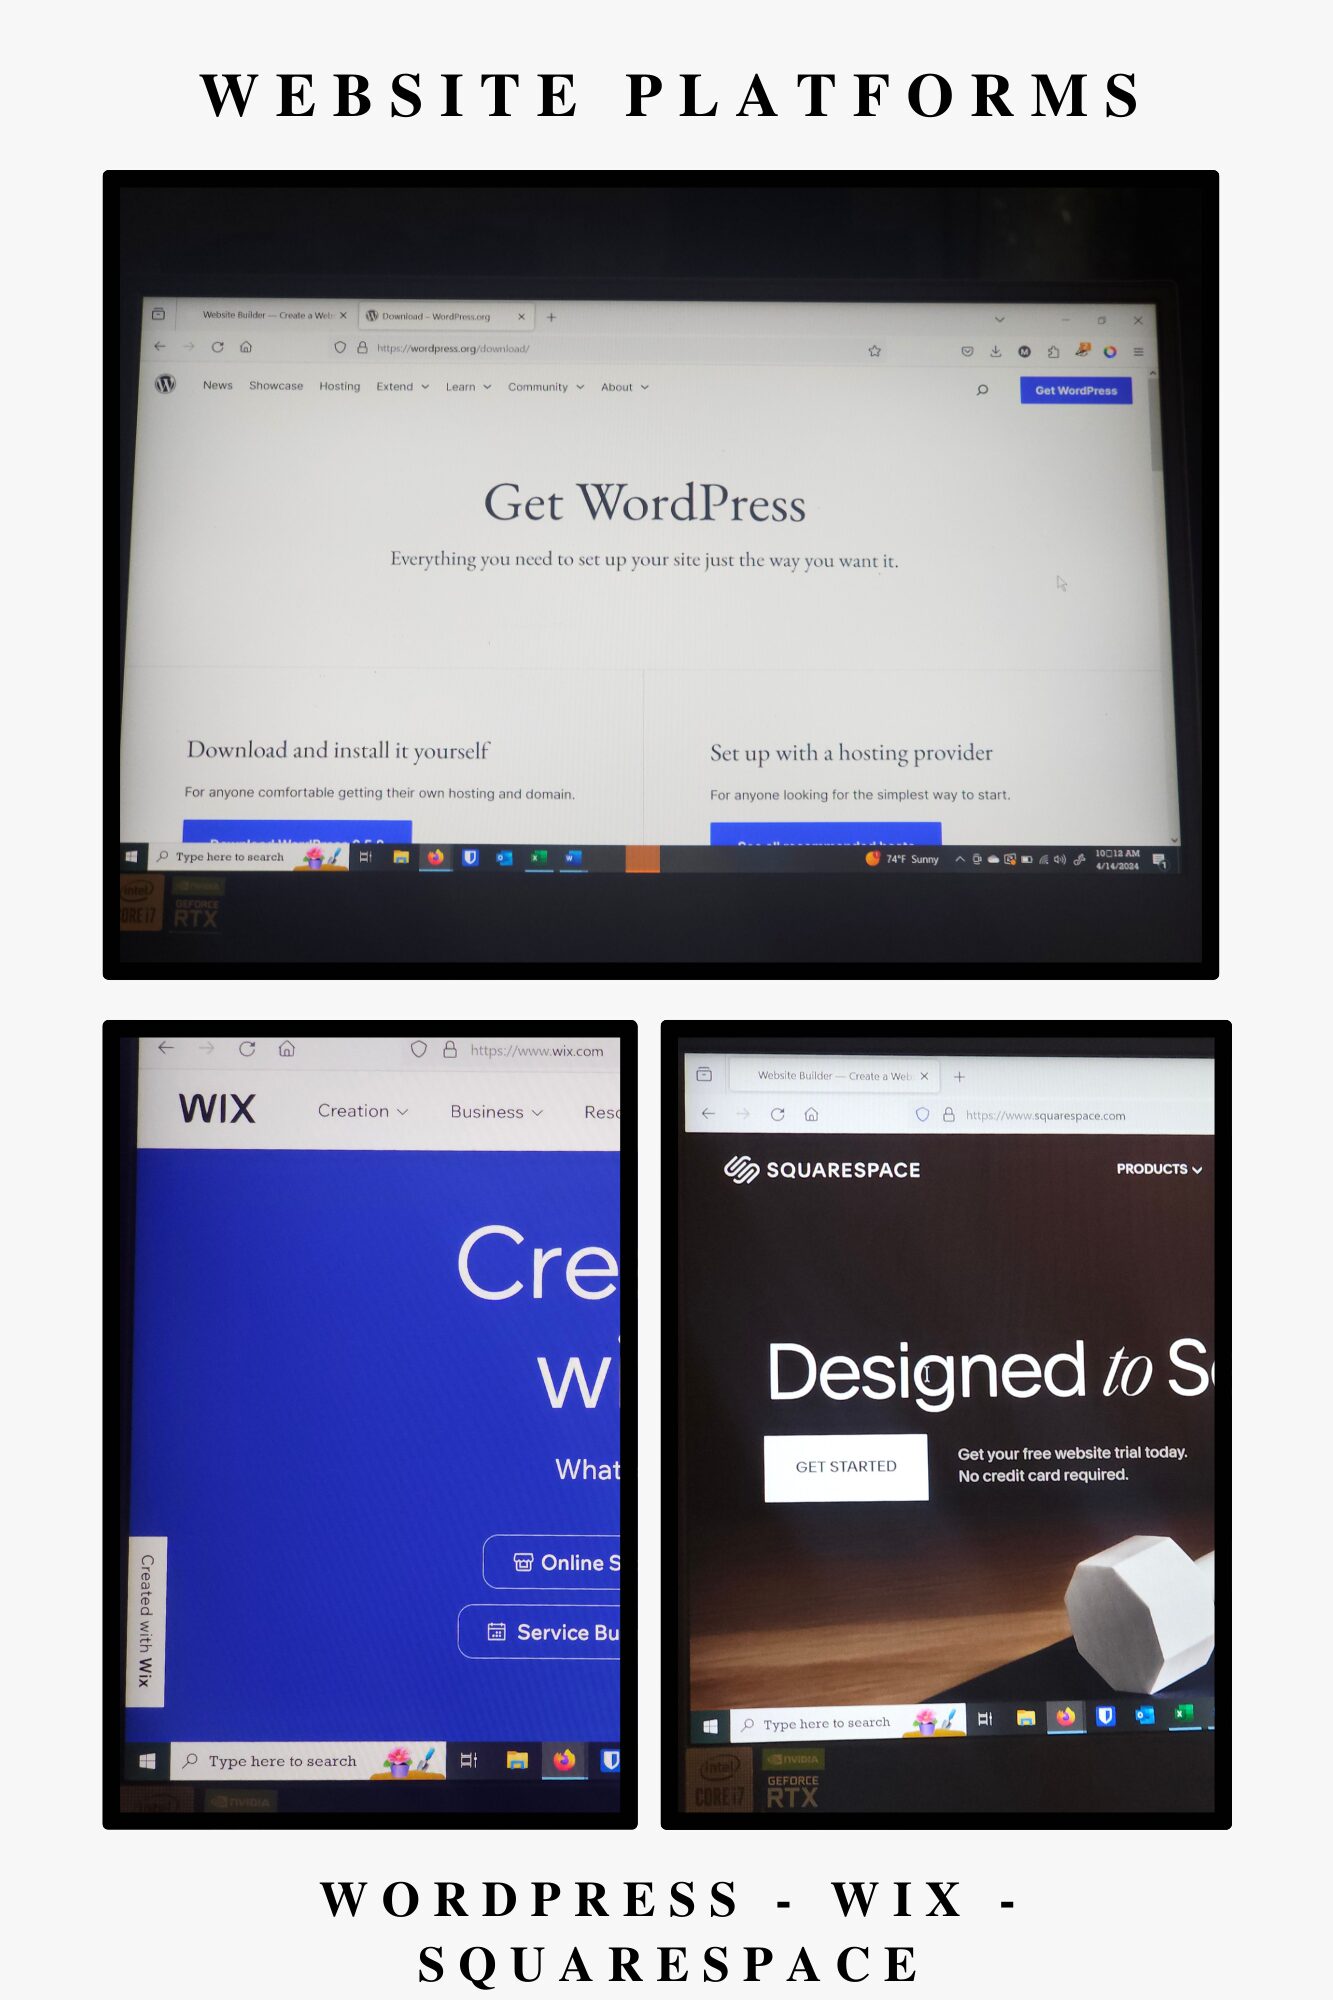 image showing wordpress, wix, and squarespace home page